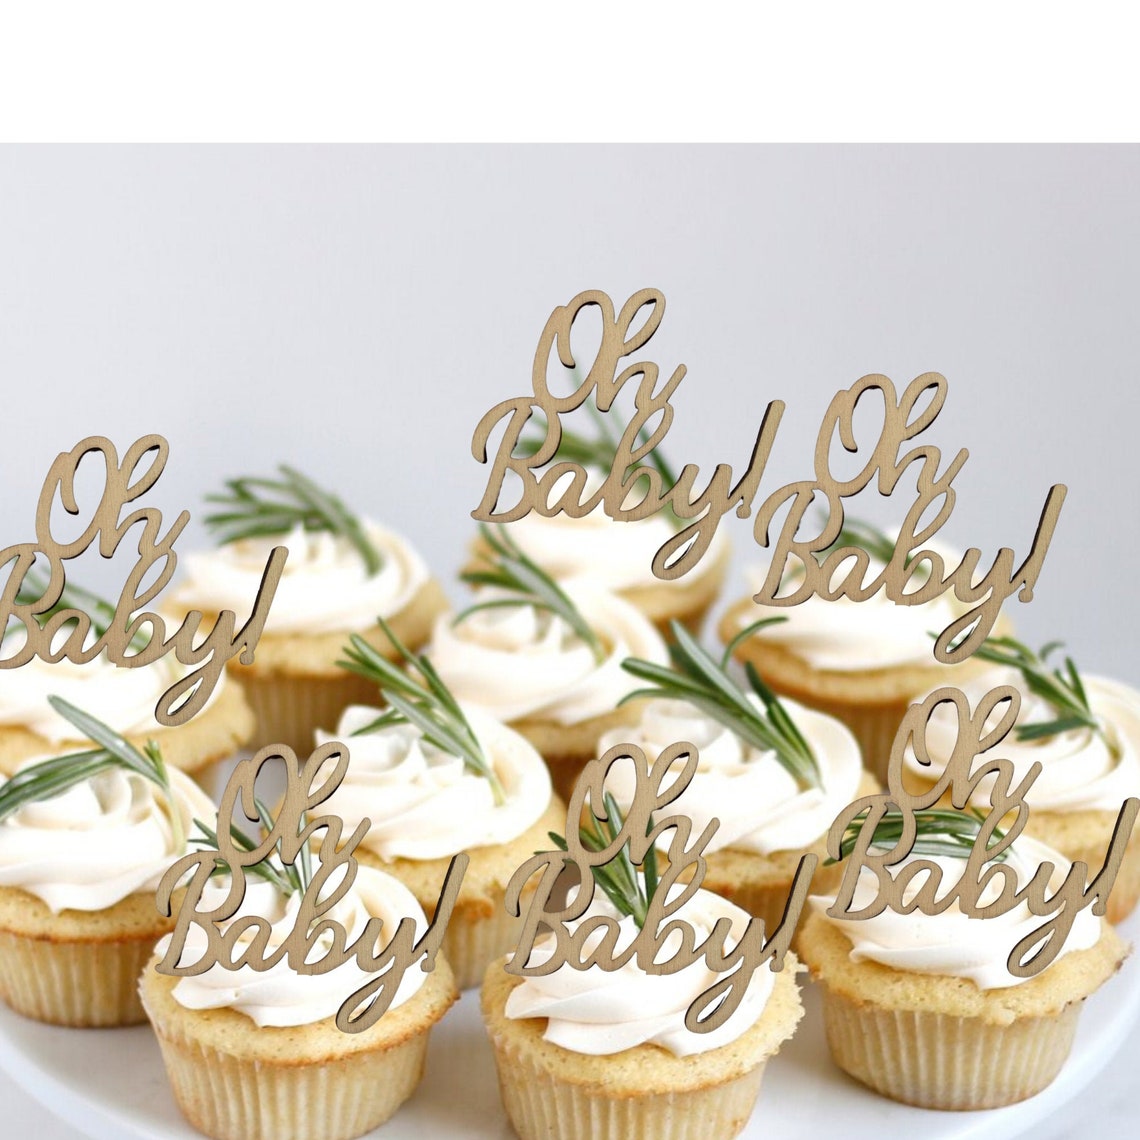 Baby Shower Cupcake Toppers, Printable Cupcake Toppers, Baby Deer,  Greenery, Boho, Sweet Baby, Boy, Baby Shower Decor, MCP840